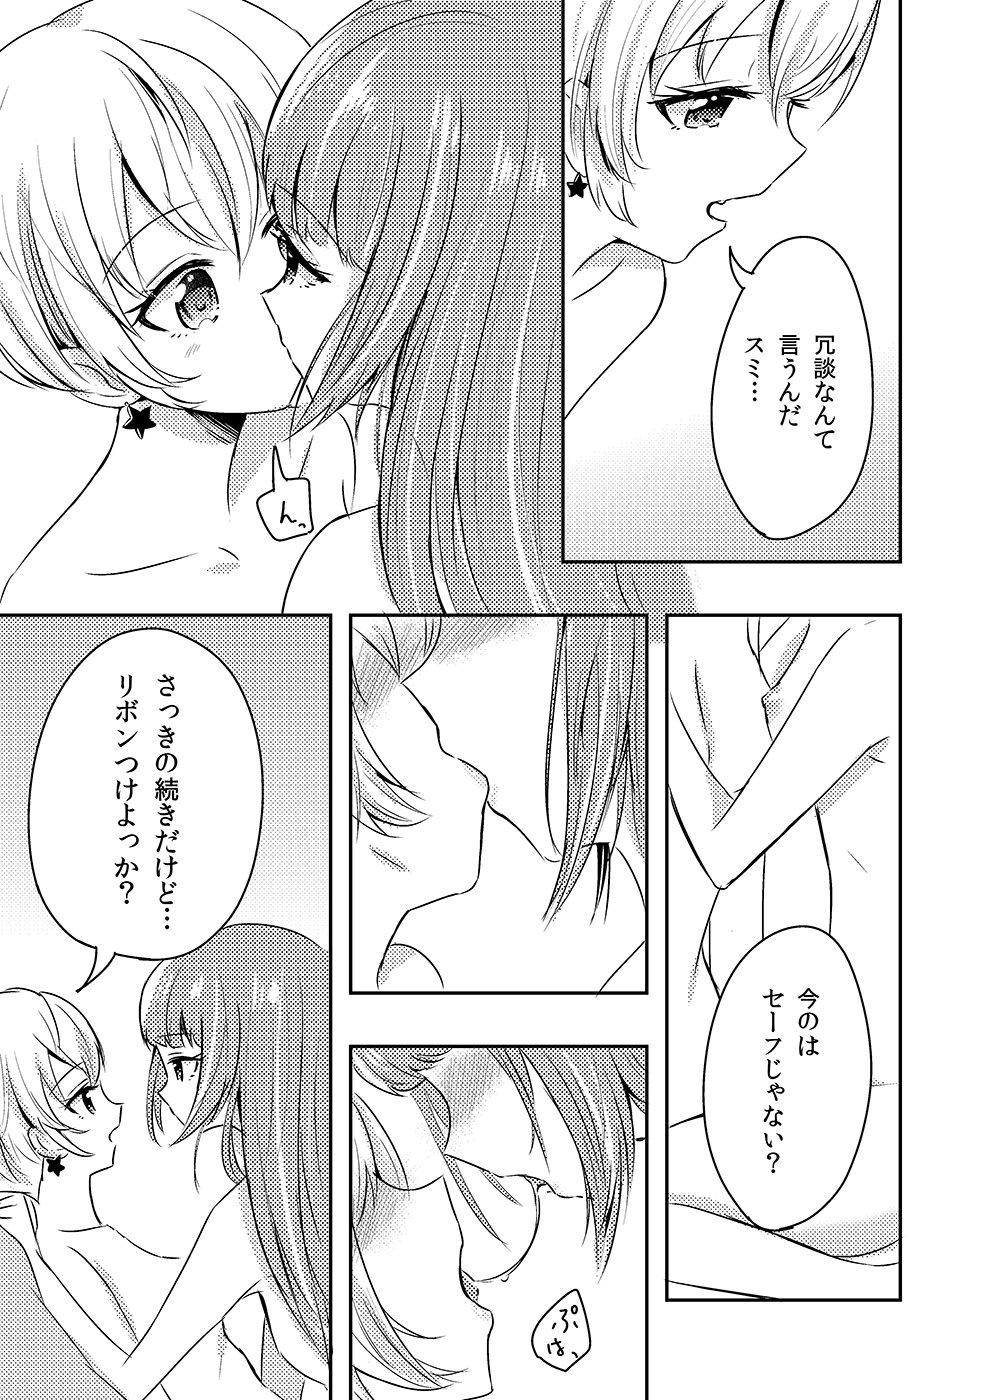 Slim Who contributed to loveless sex joint two years ago! Yuusumi manga. - Aikatsu Titjob - Picture 3